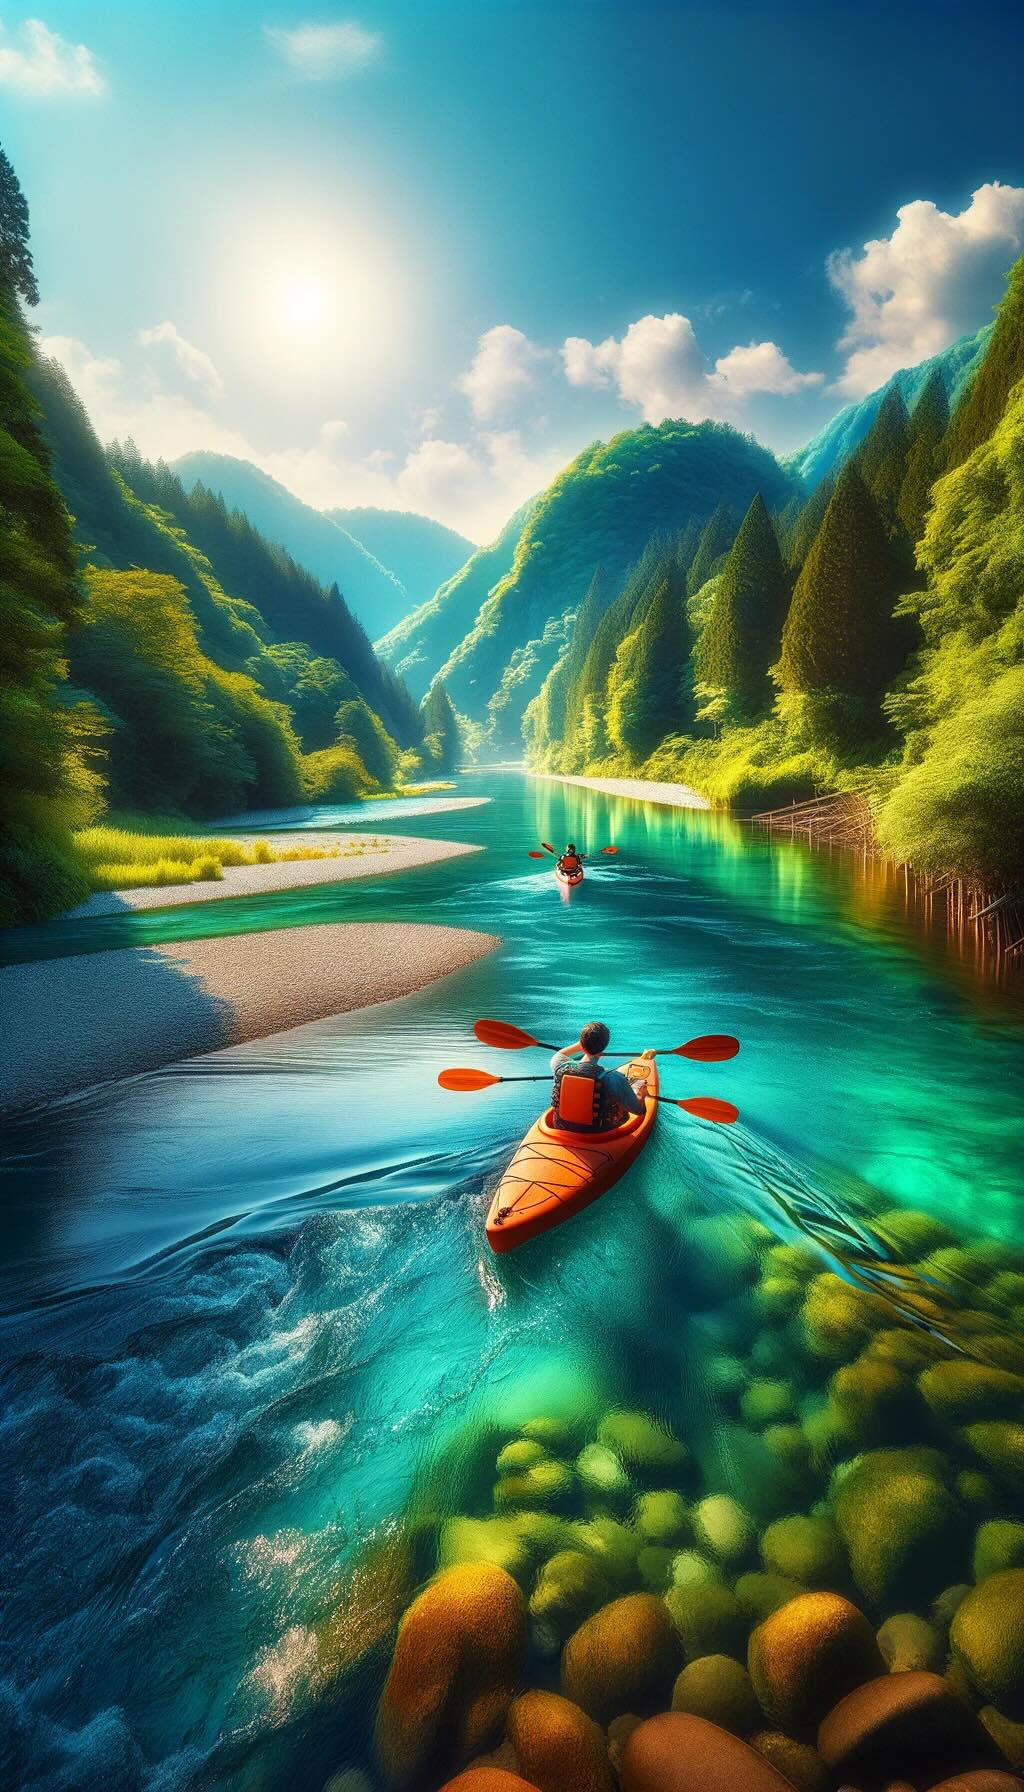 Beautifully captures the experience of kayaking on the Kuma River in Japan, surrounded by its serene and lush landscapes